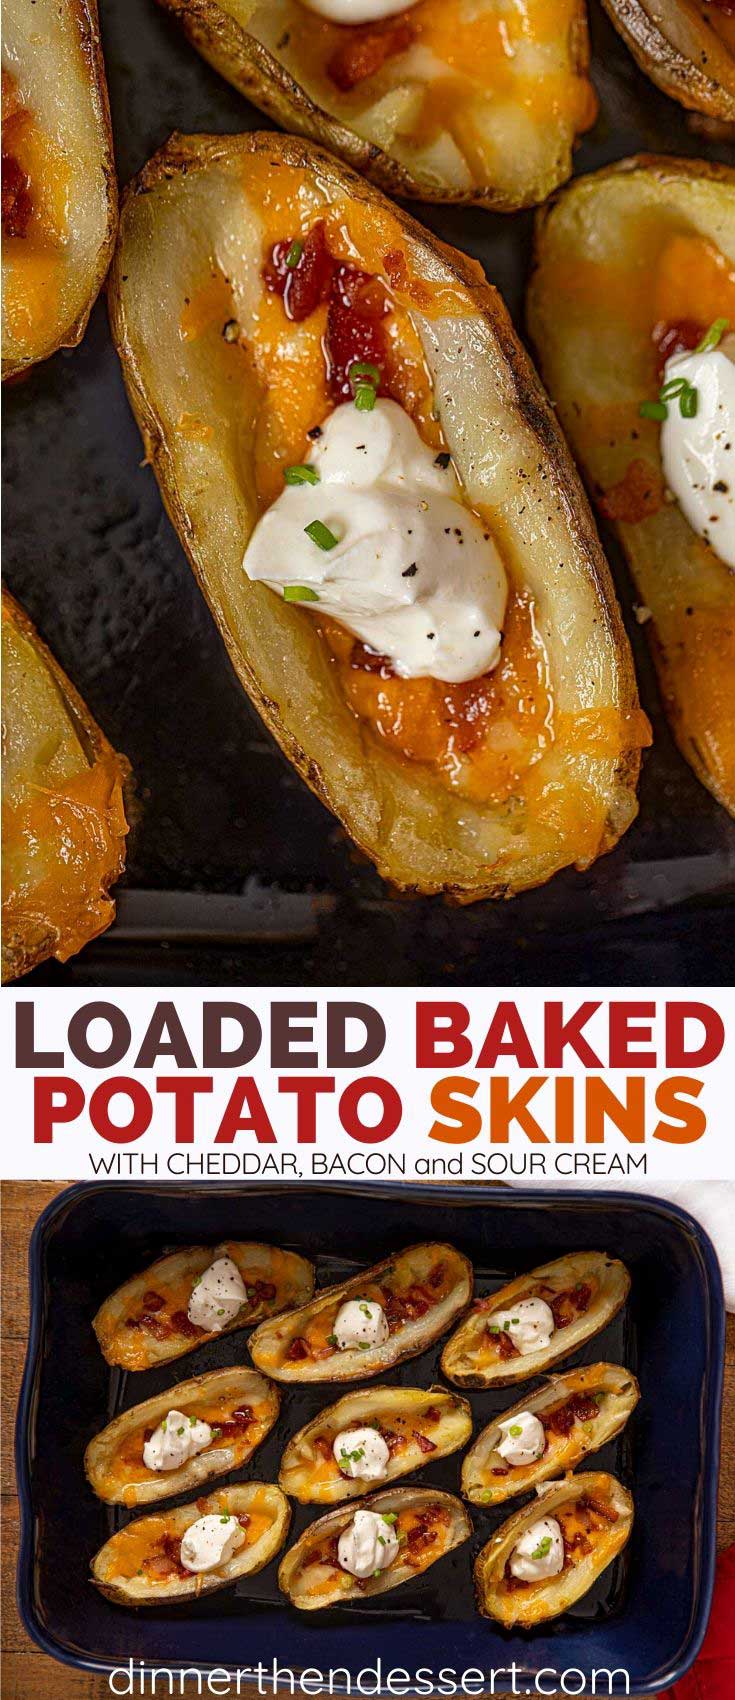 Collage of Loaded Potato Skins Photos